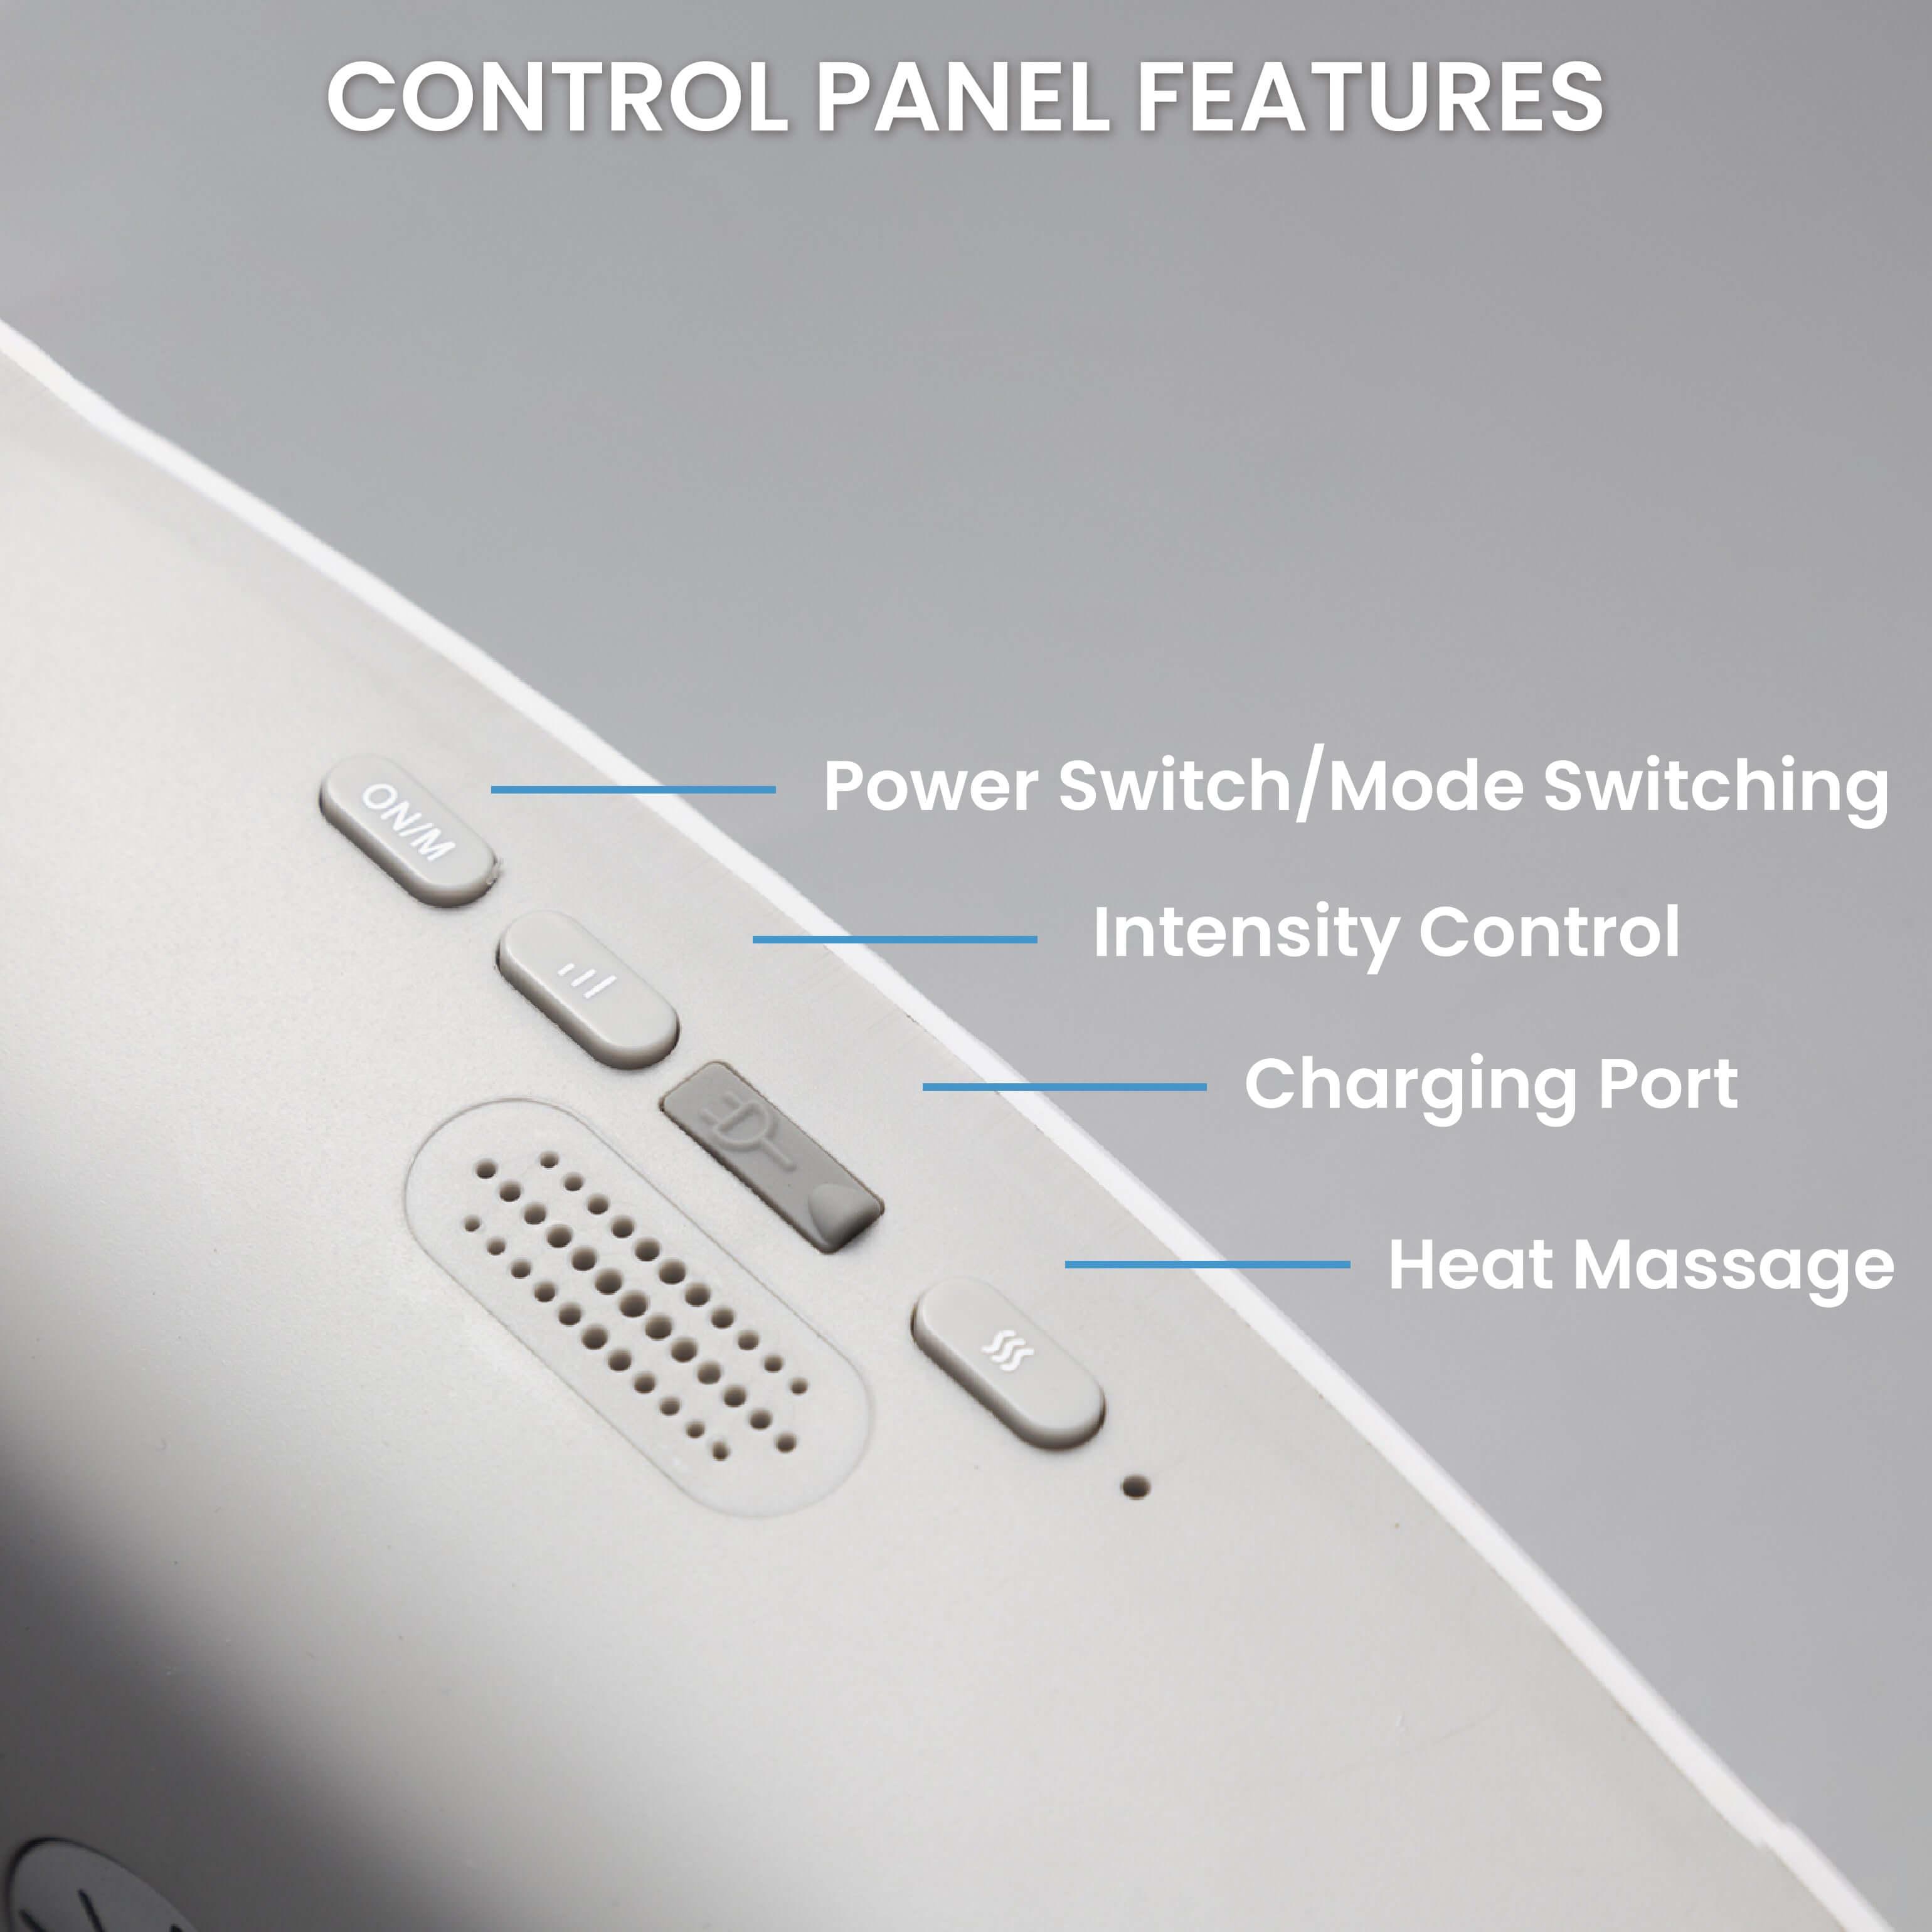 Neck & Shoulder Massager control panel showing power switch, mode switching, intensity control, charging port, and heat massage features